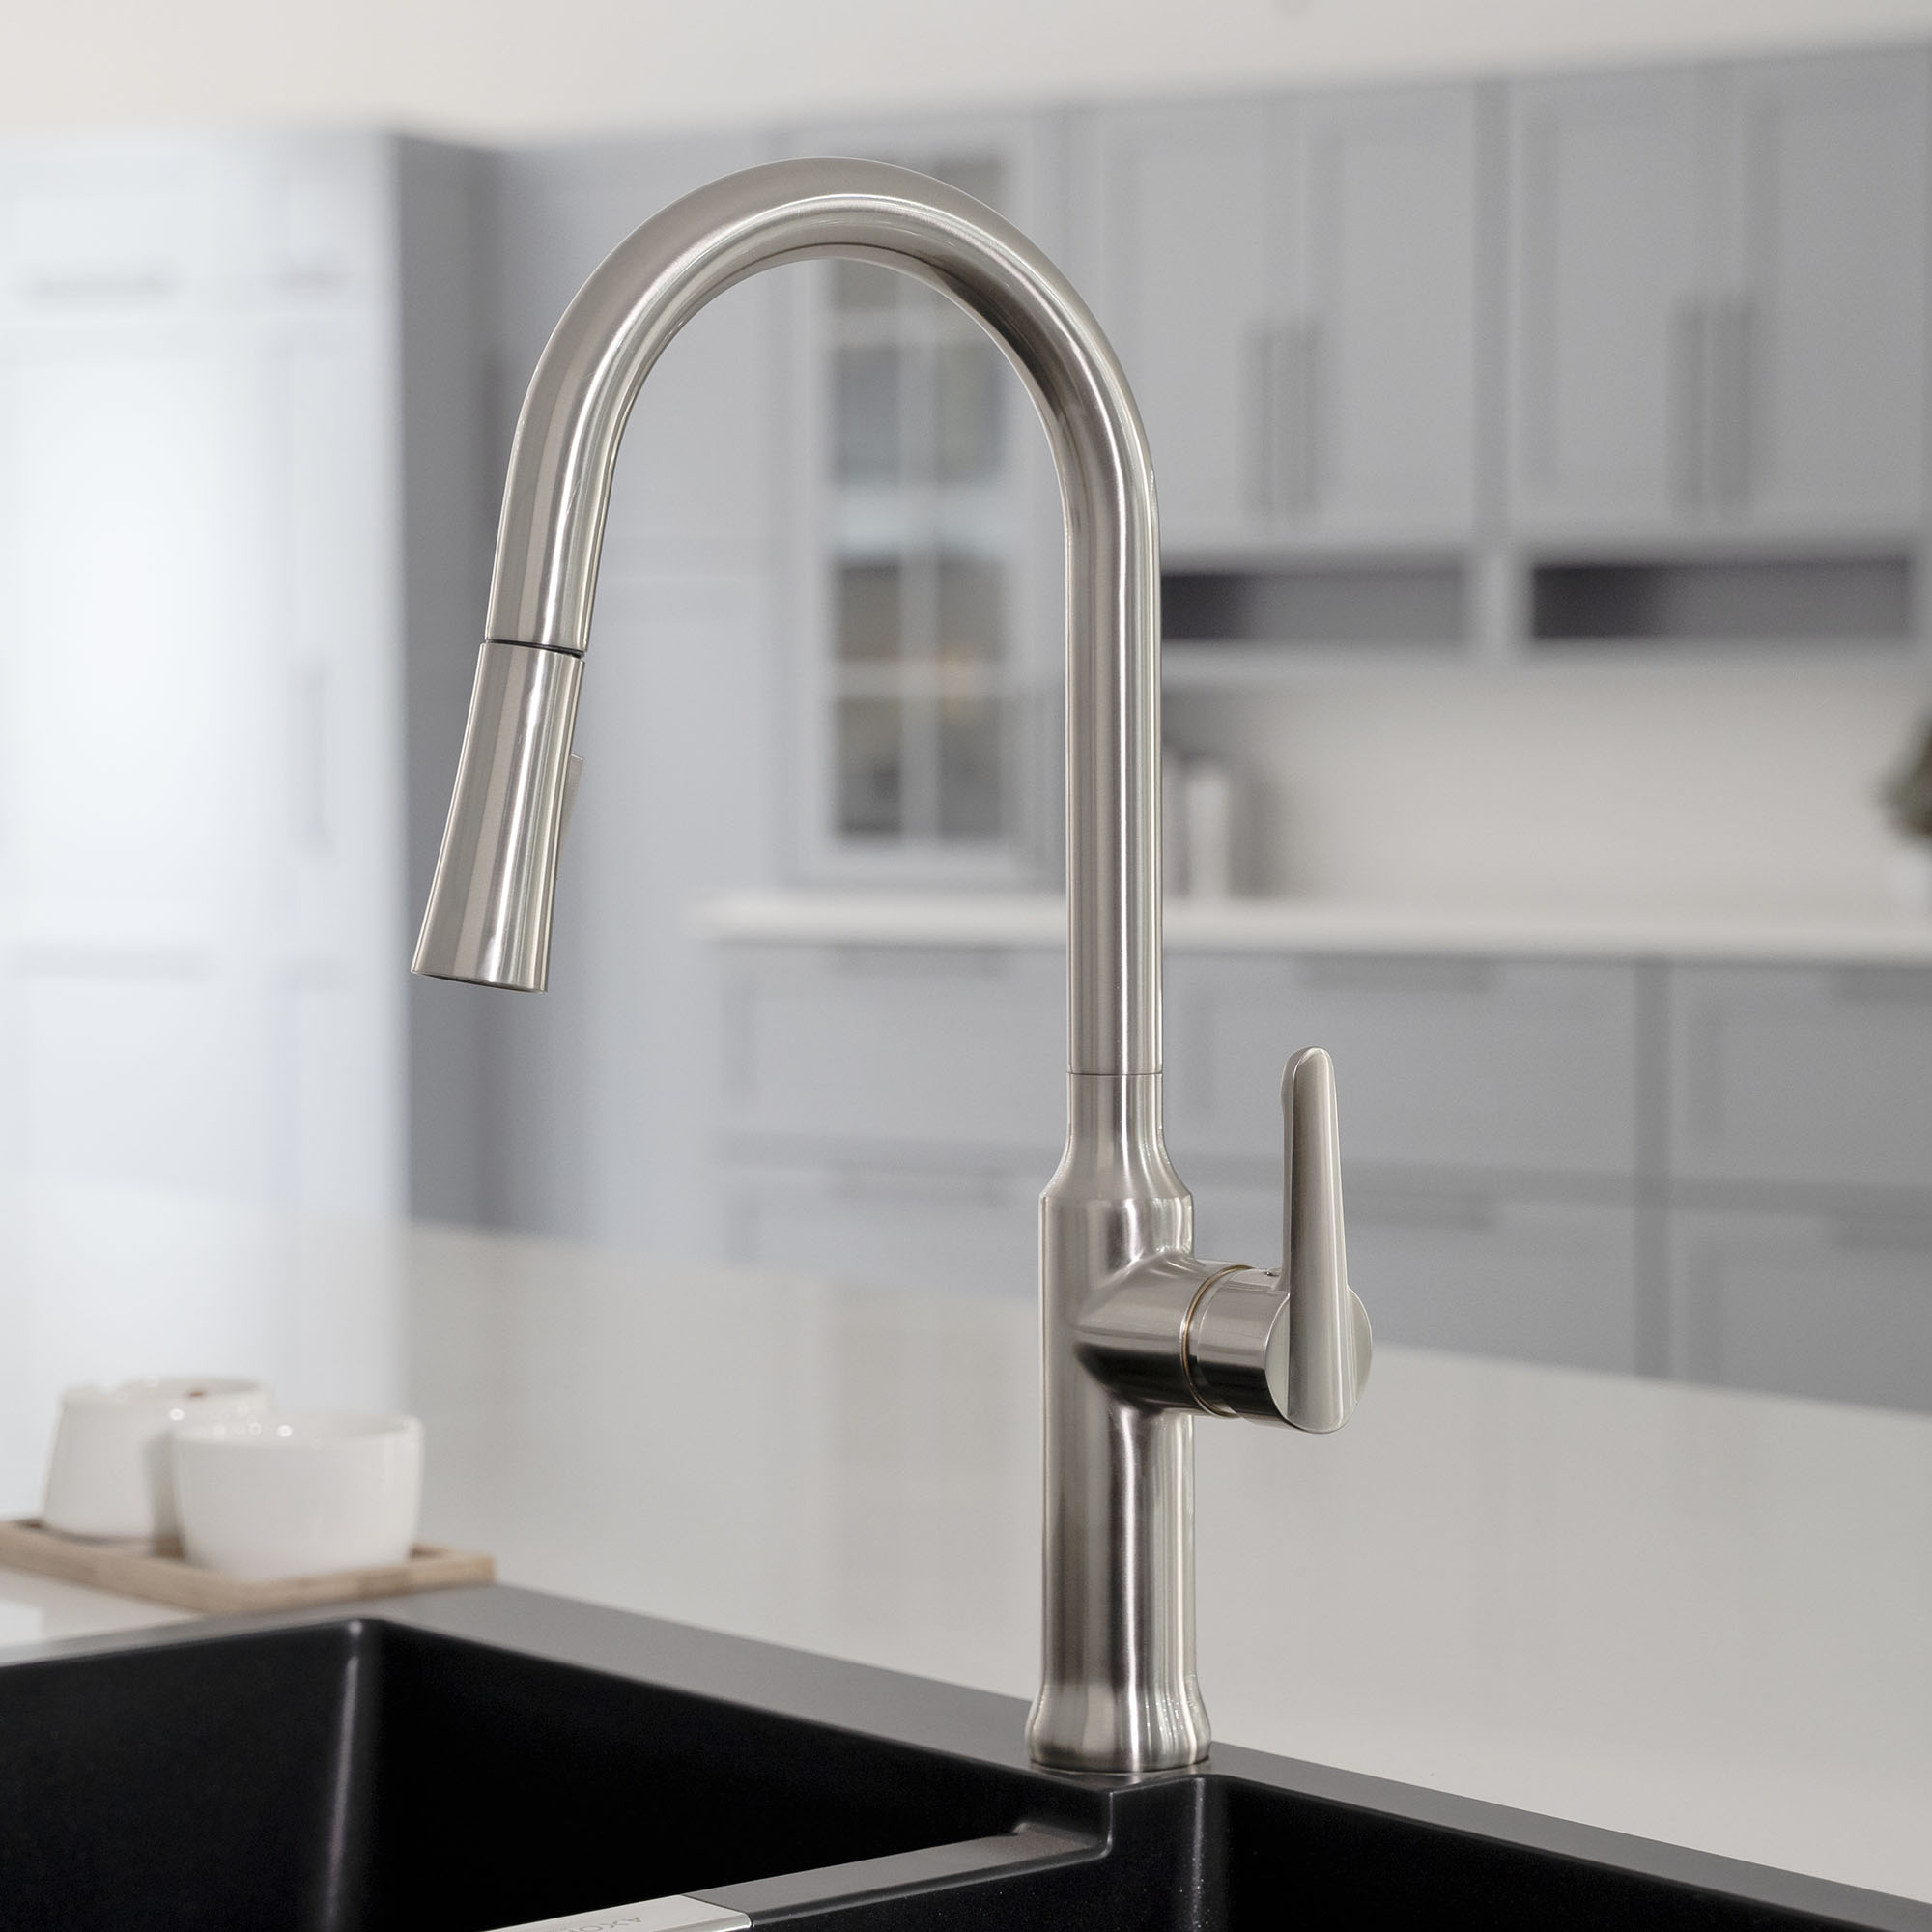 WOODBRIDGE WK030102BN Stainless Steel Single Handle Pre-Rinse Kitchen Faucet with Pull Down Sprayer, Brushed Nickel Finish